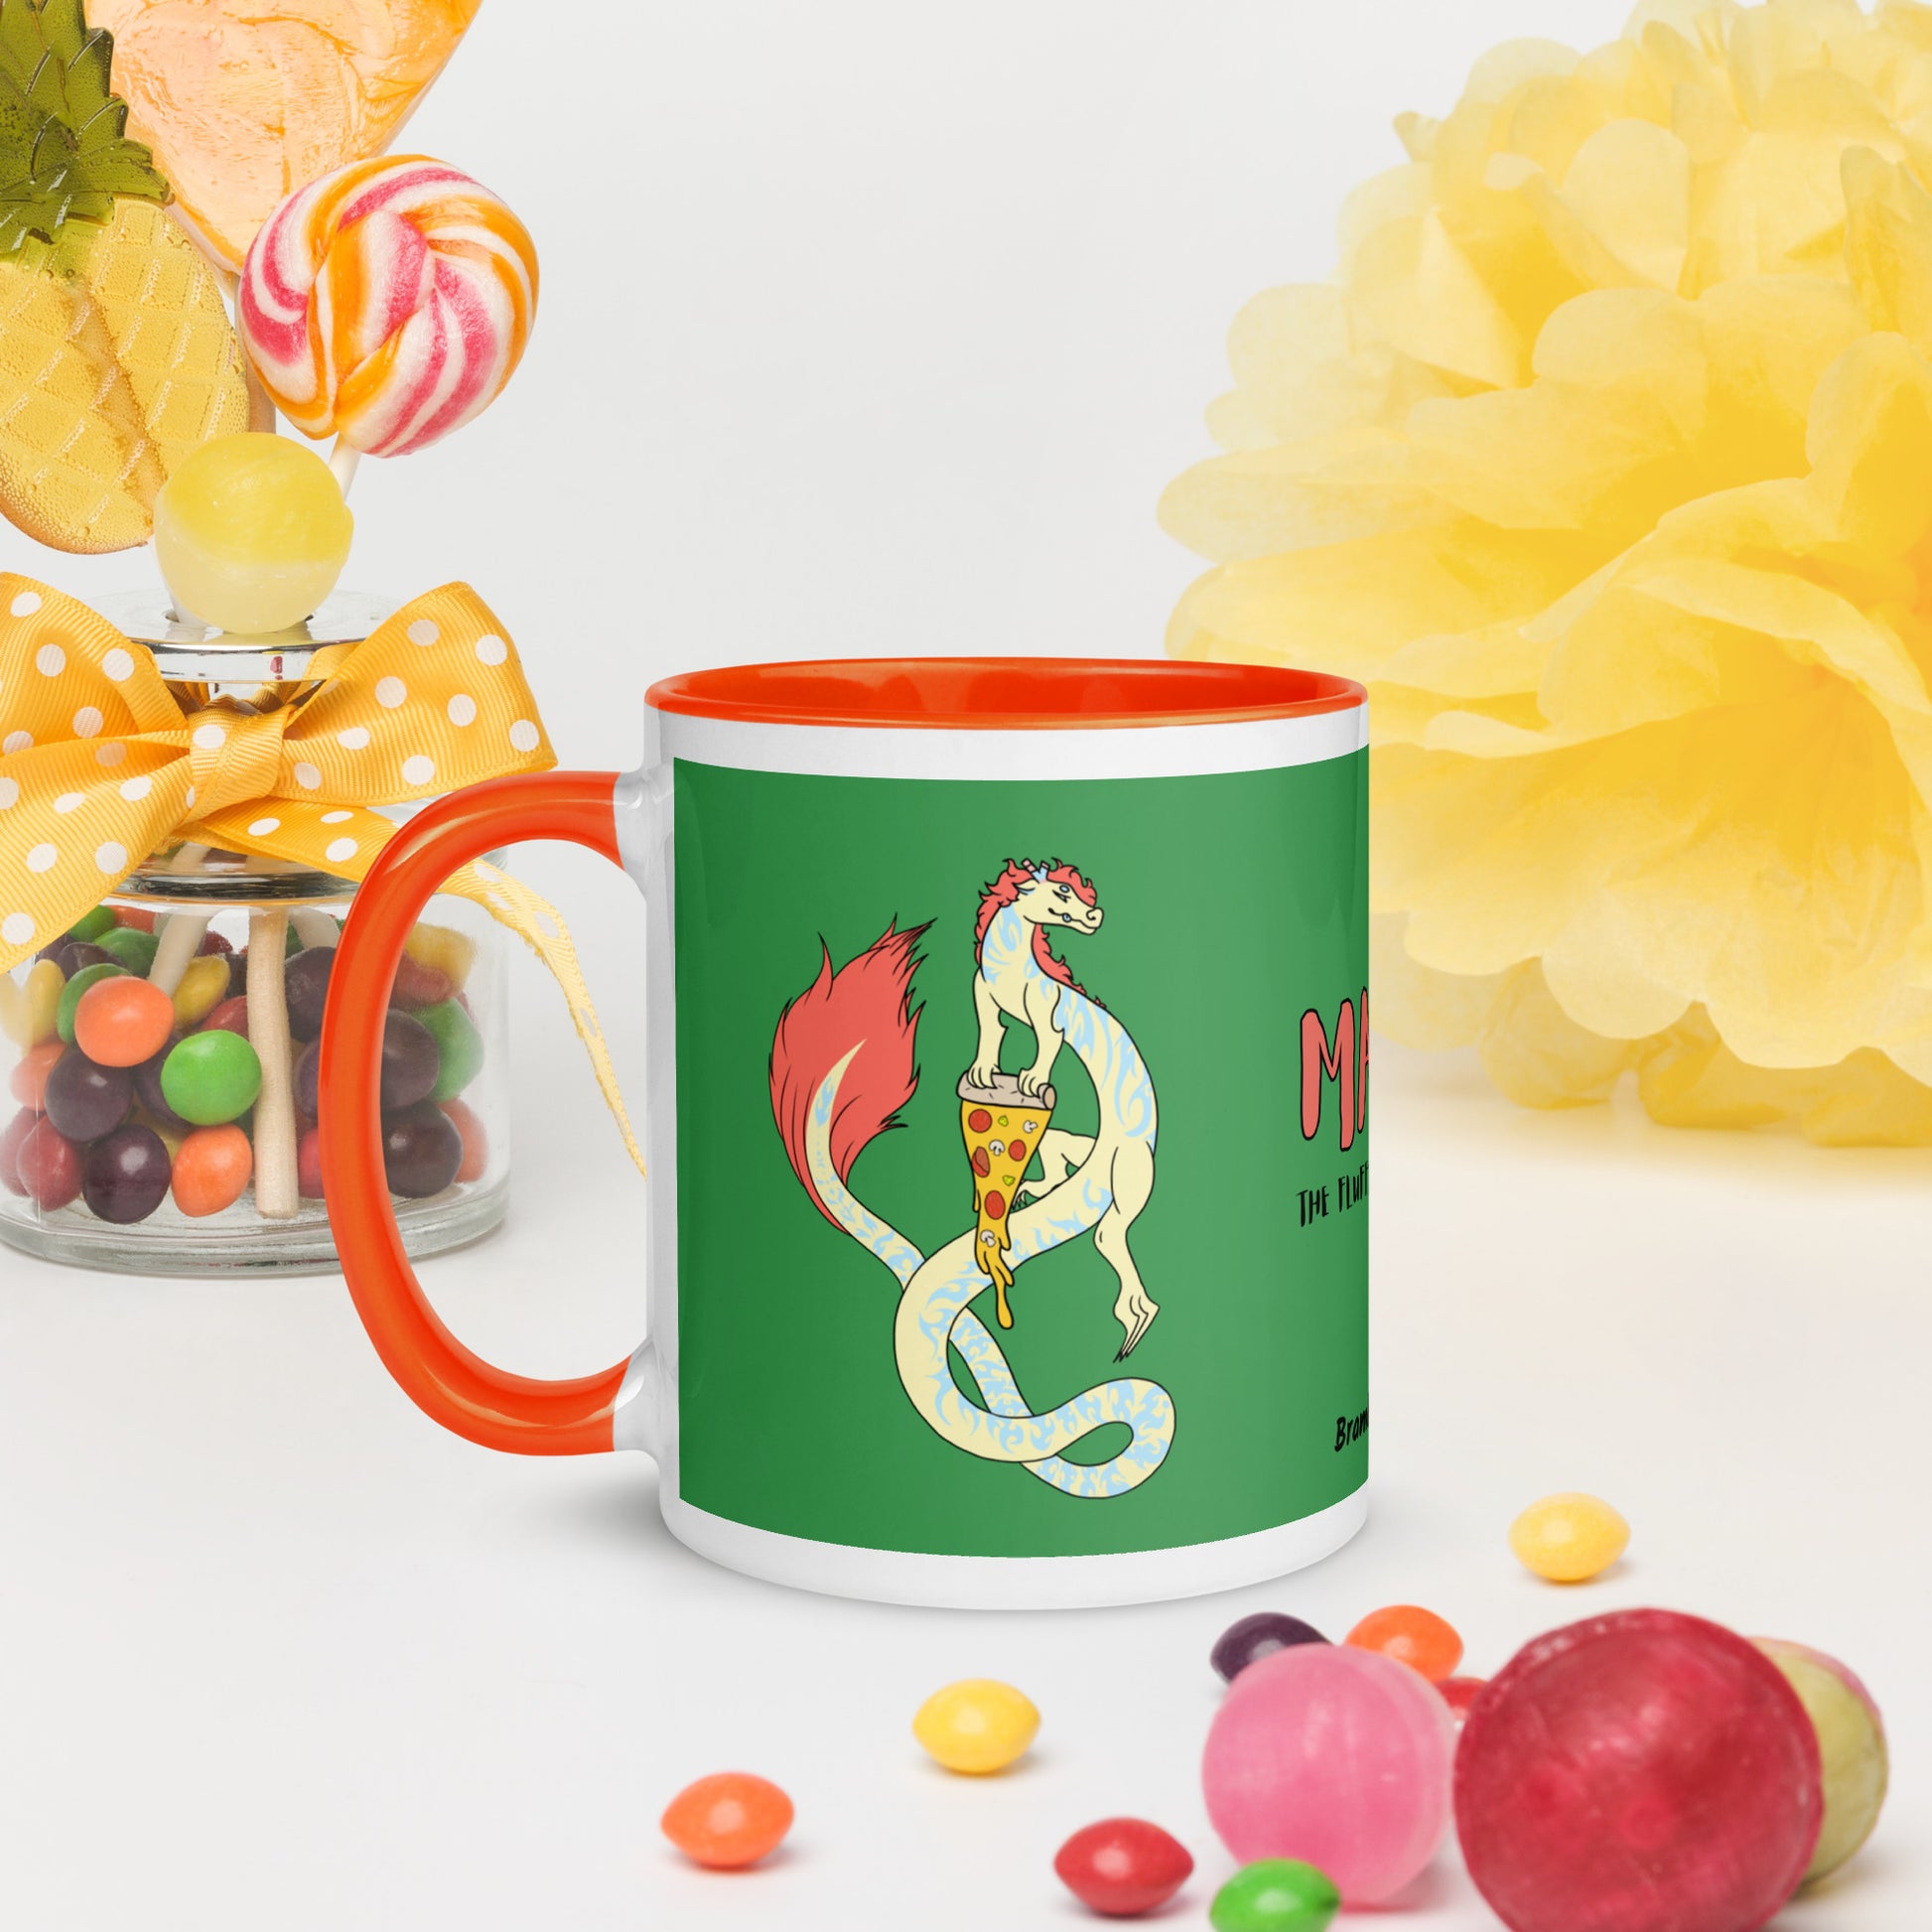 11 ounce white ceramic mug. Orange inside and handle. Features double-sided image of Maisy the Fuzzy Noodle Dragon with a slice of pizza. Shown surrounded by candies and decorations.